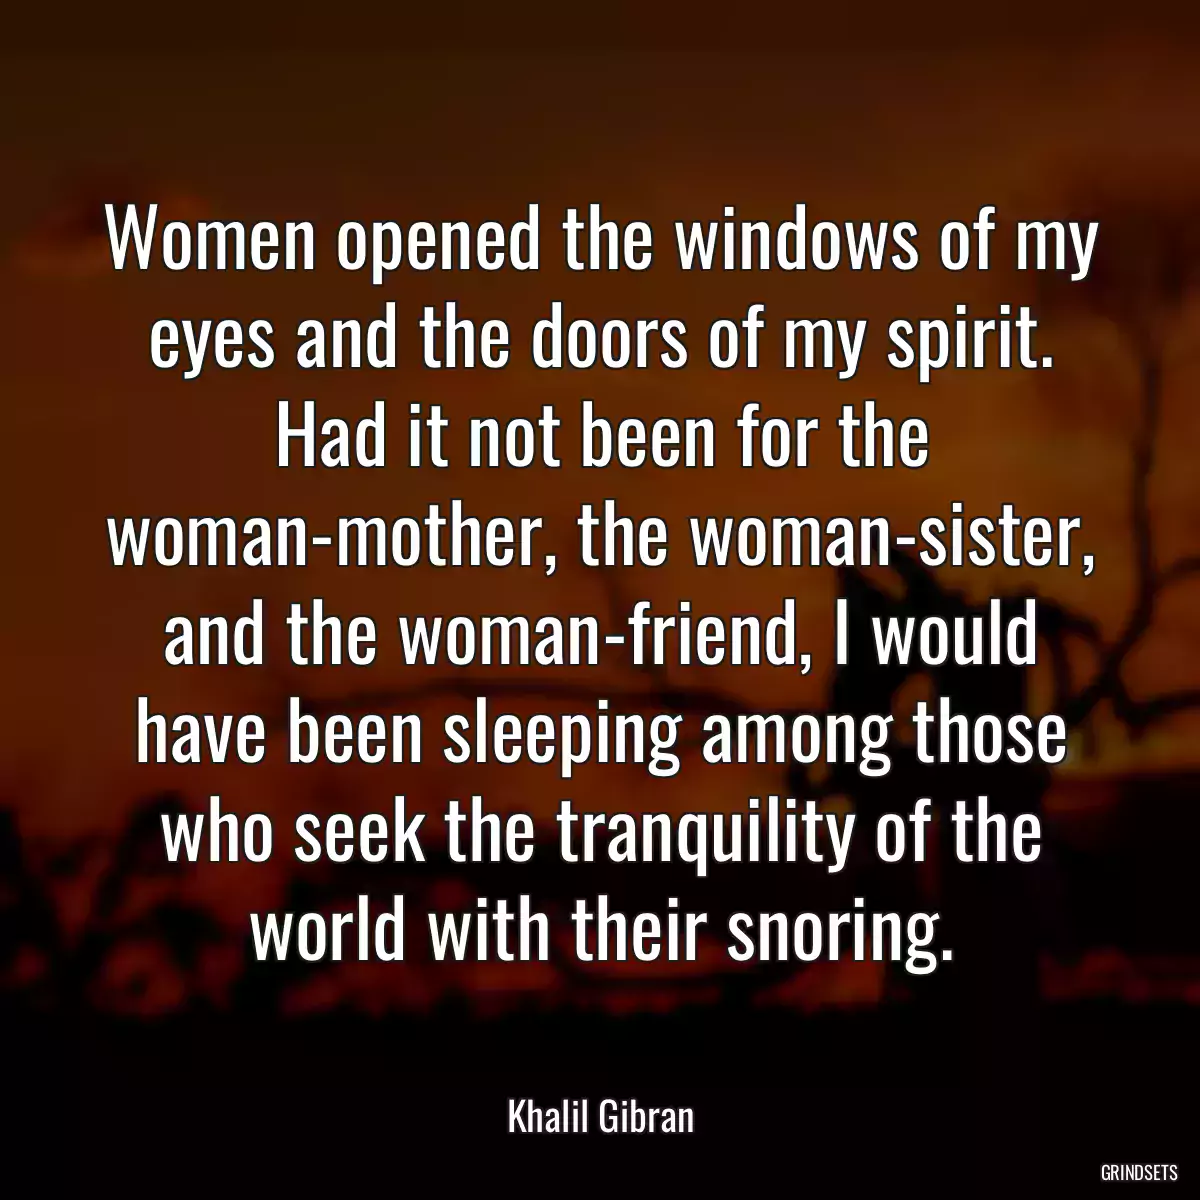 Women opened the windows of my eyes and the doors of my spirit. Had it not been for the woman-mother, the woman-sister, and the woman-friend, I would have been sleeping among those who seek the tranquility of the world with their snoring.